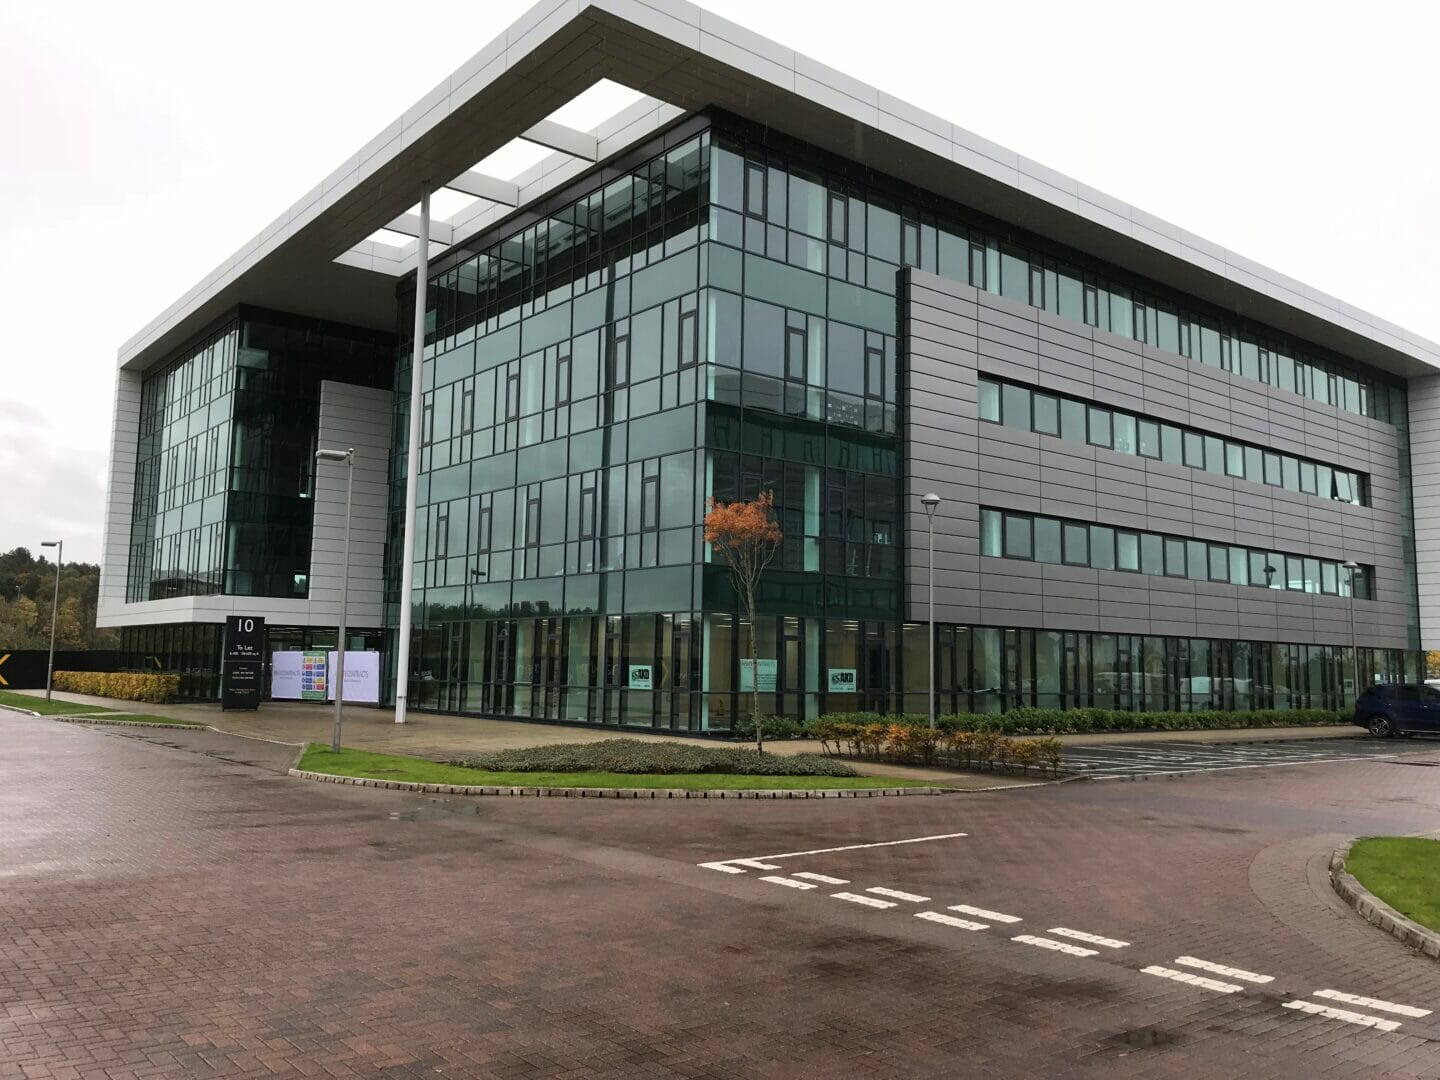 Maxim 10 Offices get maximum energy efficiency from CP Electronics & AKD  @CPElectronics @AKD